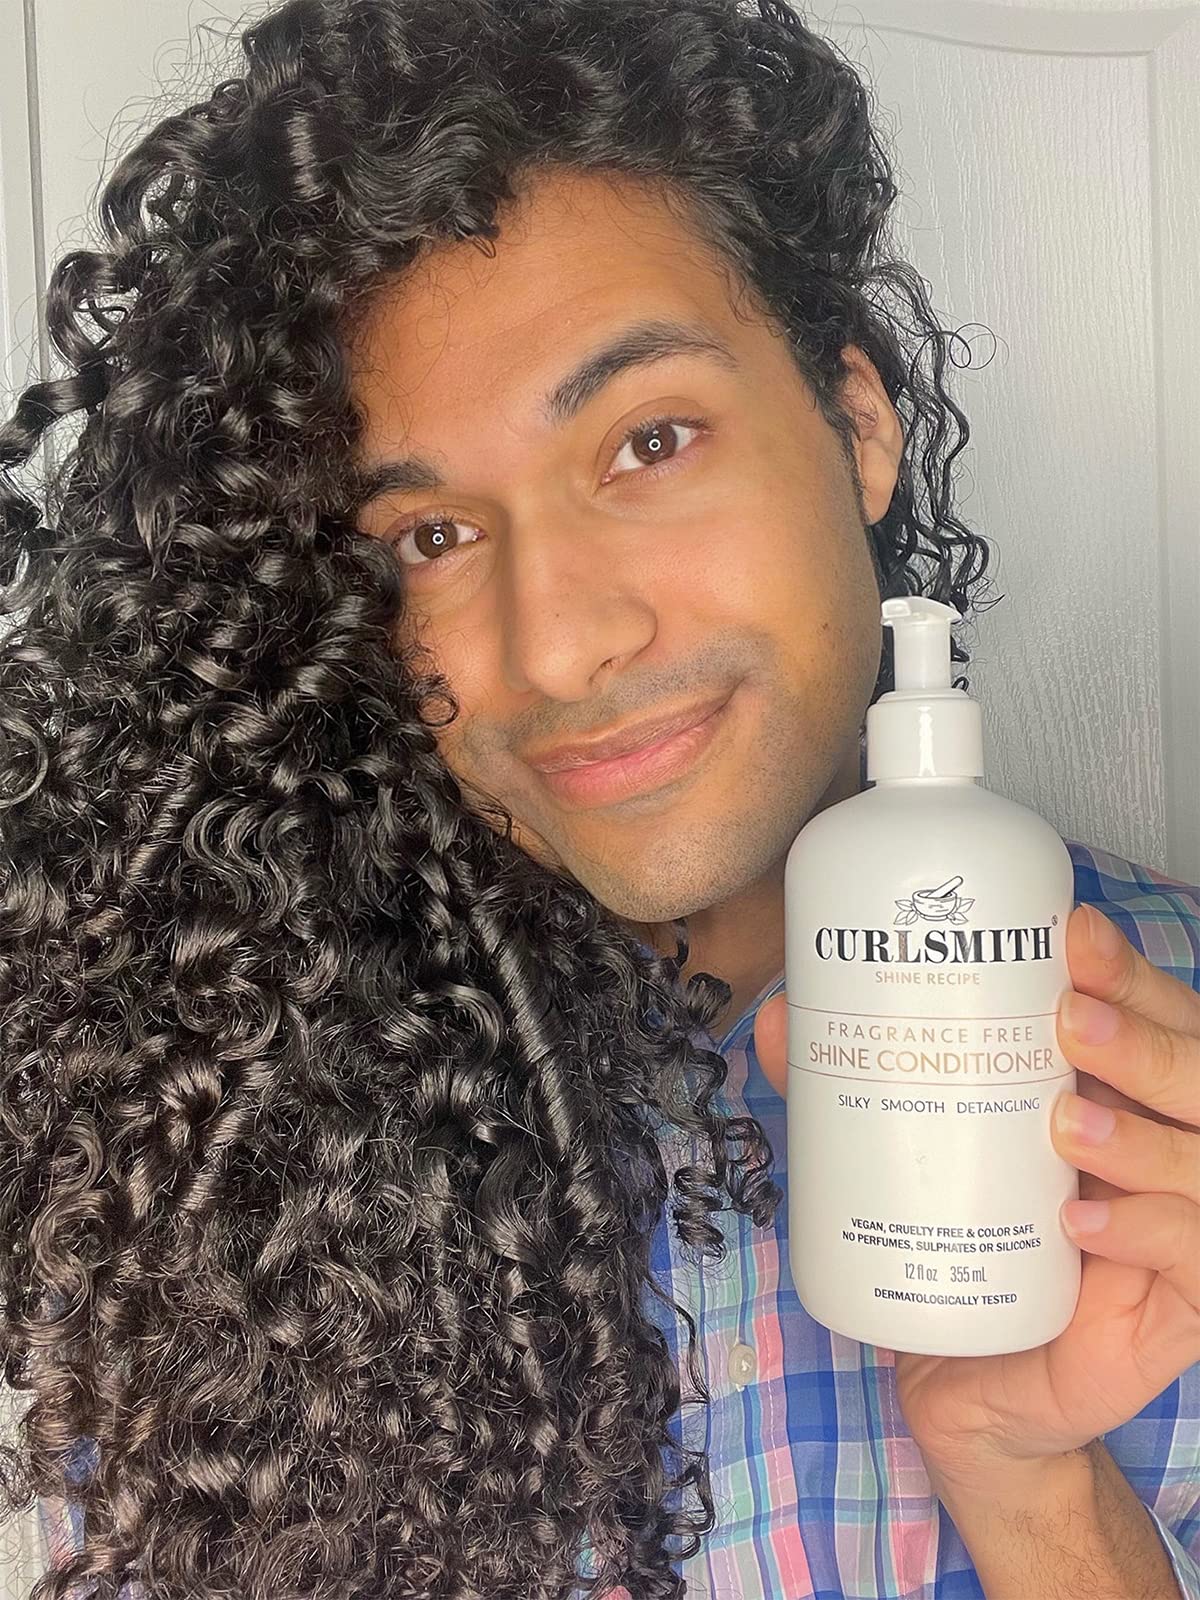 CURLSMITH - Shine Conditioner, Gentle and Moisturising, Sensitive, Fragrance Free for All Curl and Hair Types, Vegan (2 fl oz)